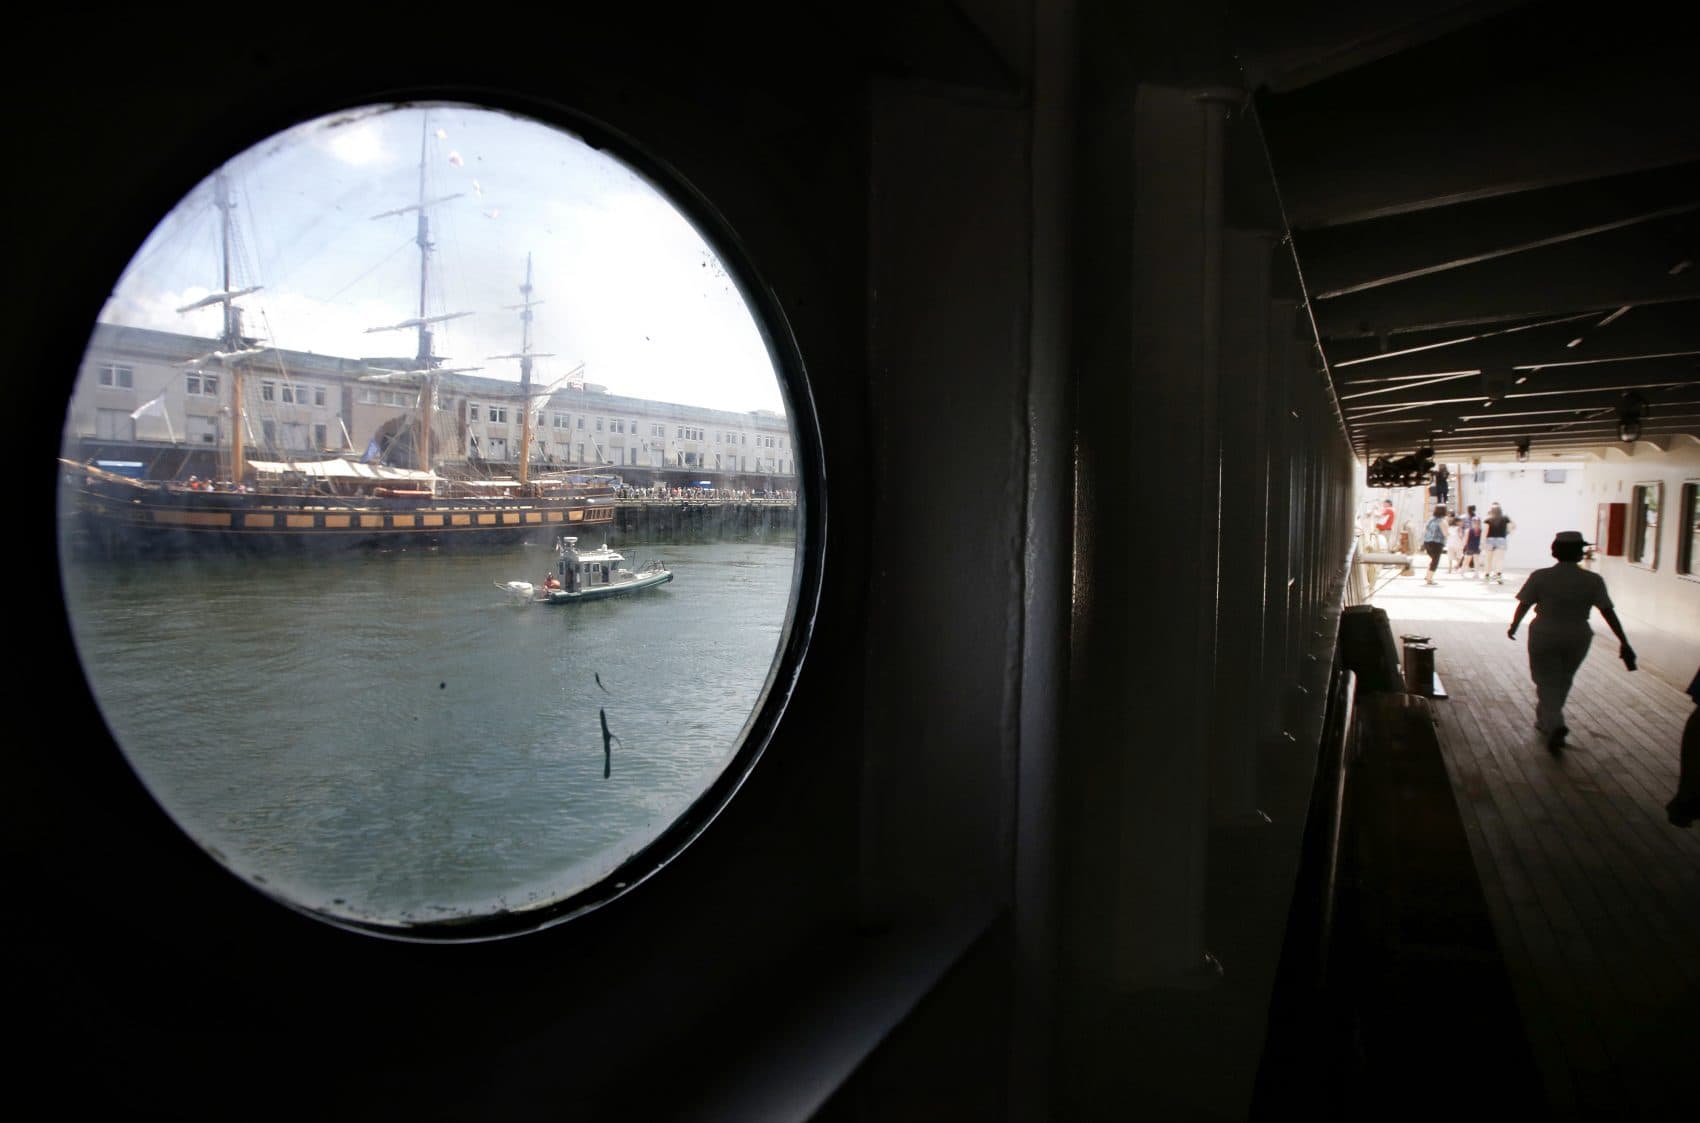 The tall ship Oliver Hazard Perry, top left, is viewed through a porthole on the Peruvian Navy tall ship Union as passers-by, right, walk along a deck aboard the Union on Sunday in Boston. (Steven Senne/AP)